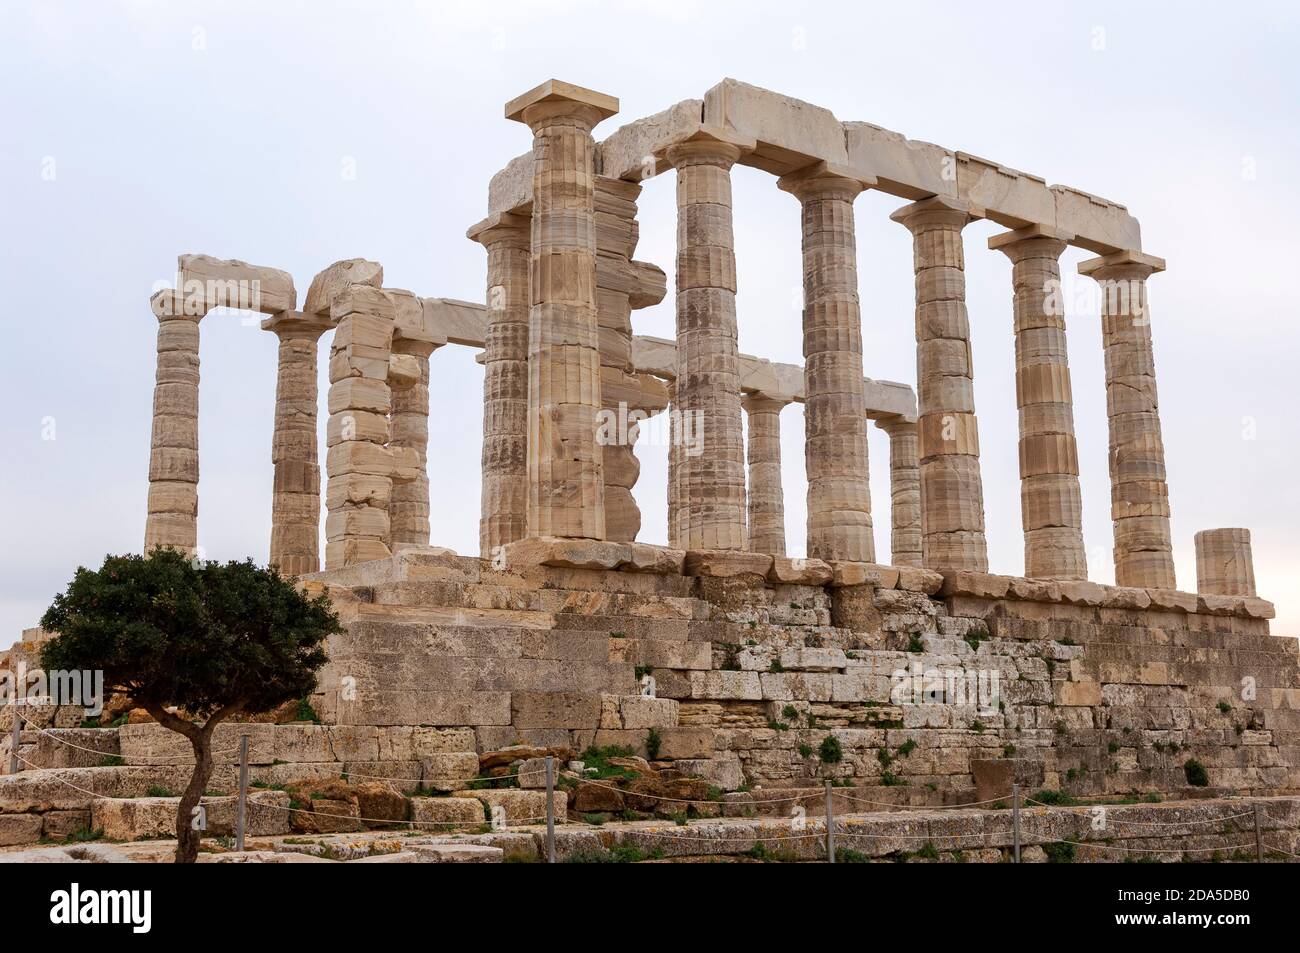 The Temple of Poseidon at Sounion in Greece Stock Photo